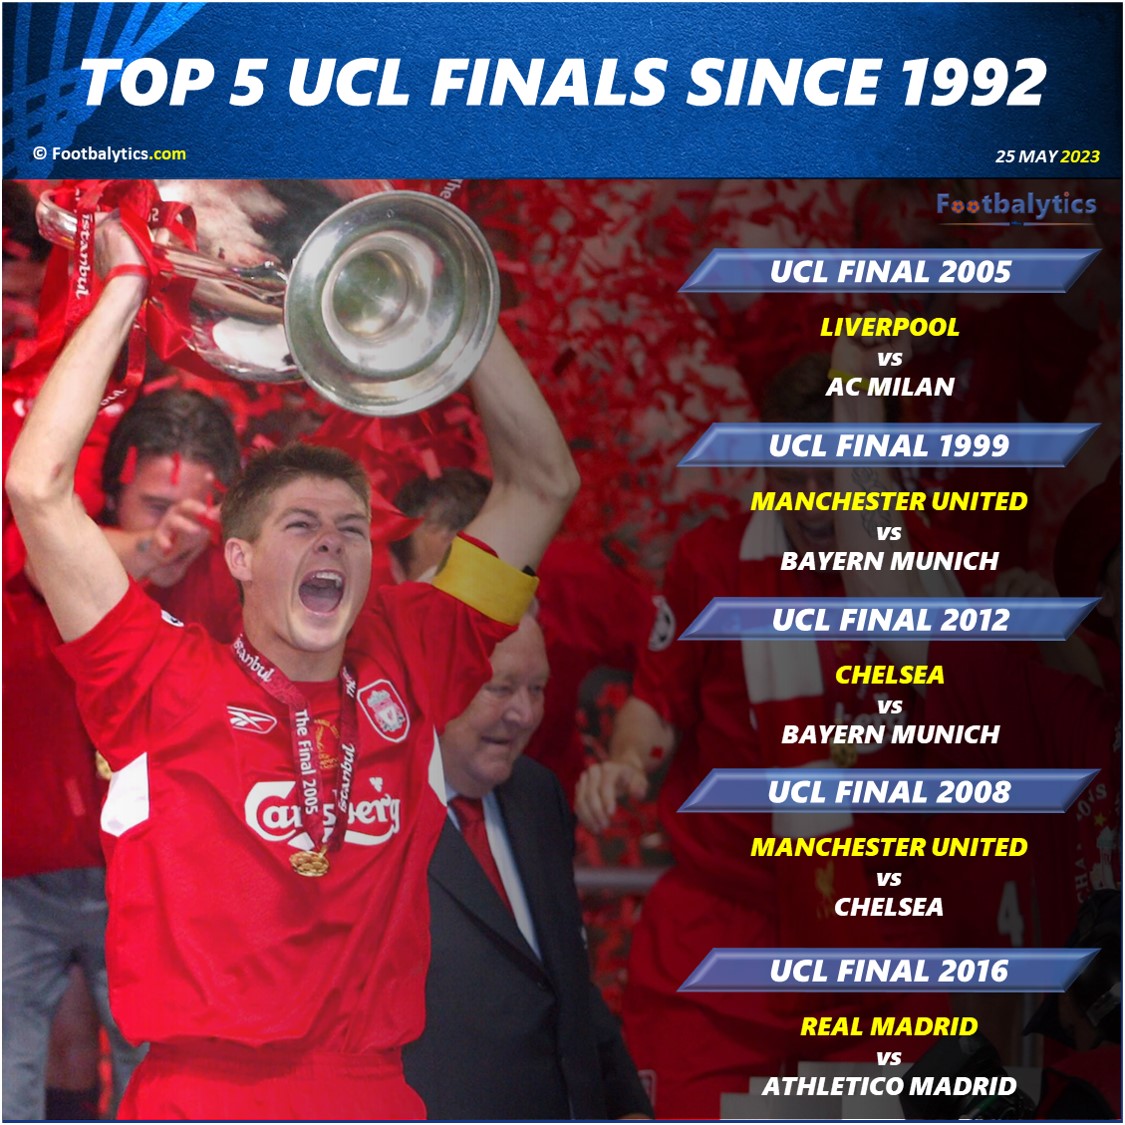 Exclusive: Ranking the Best UCL Final Ever from 1992 to 2023